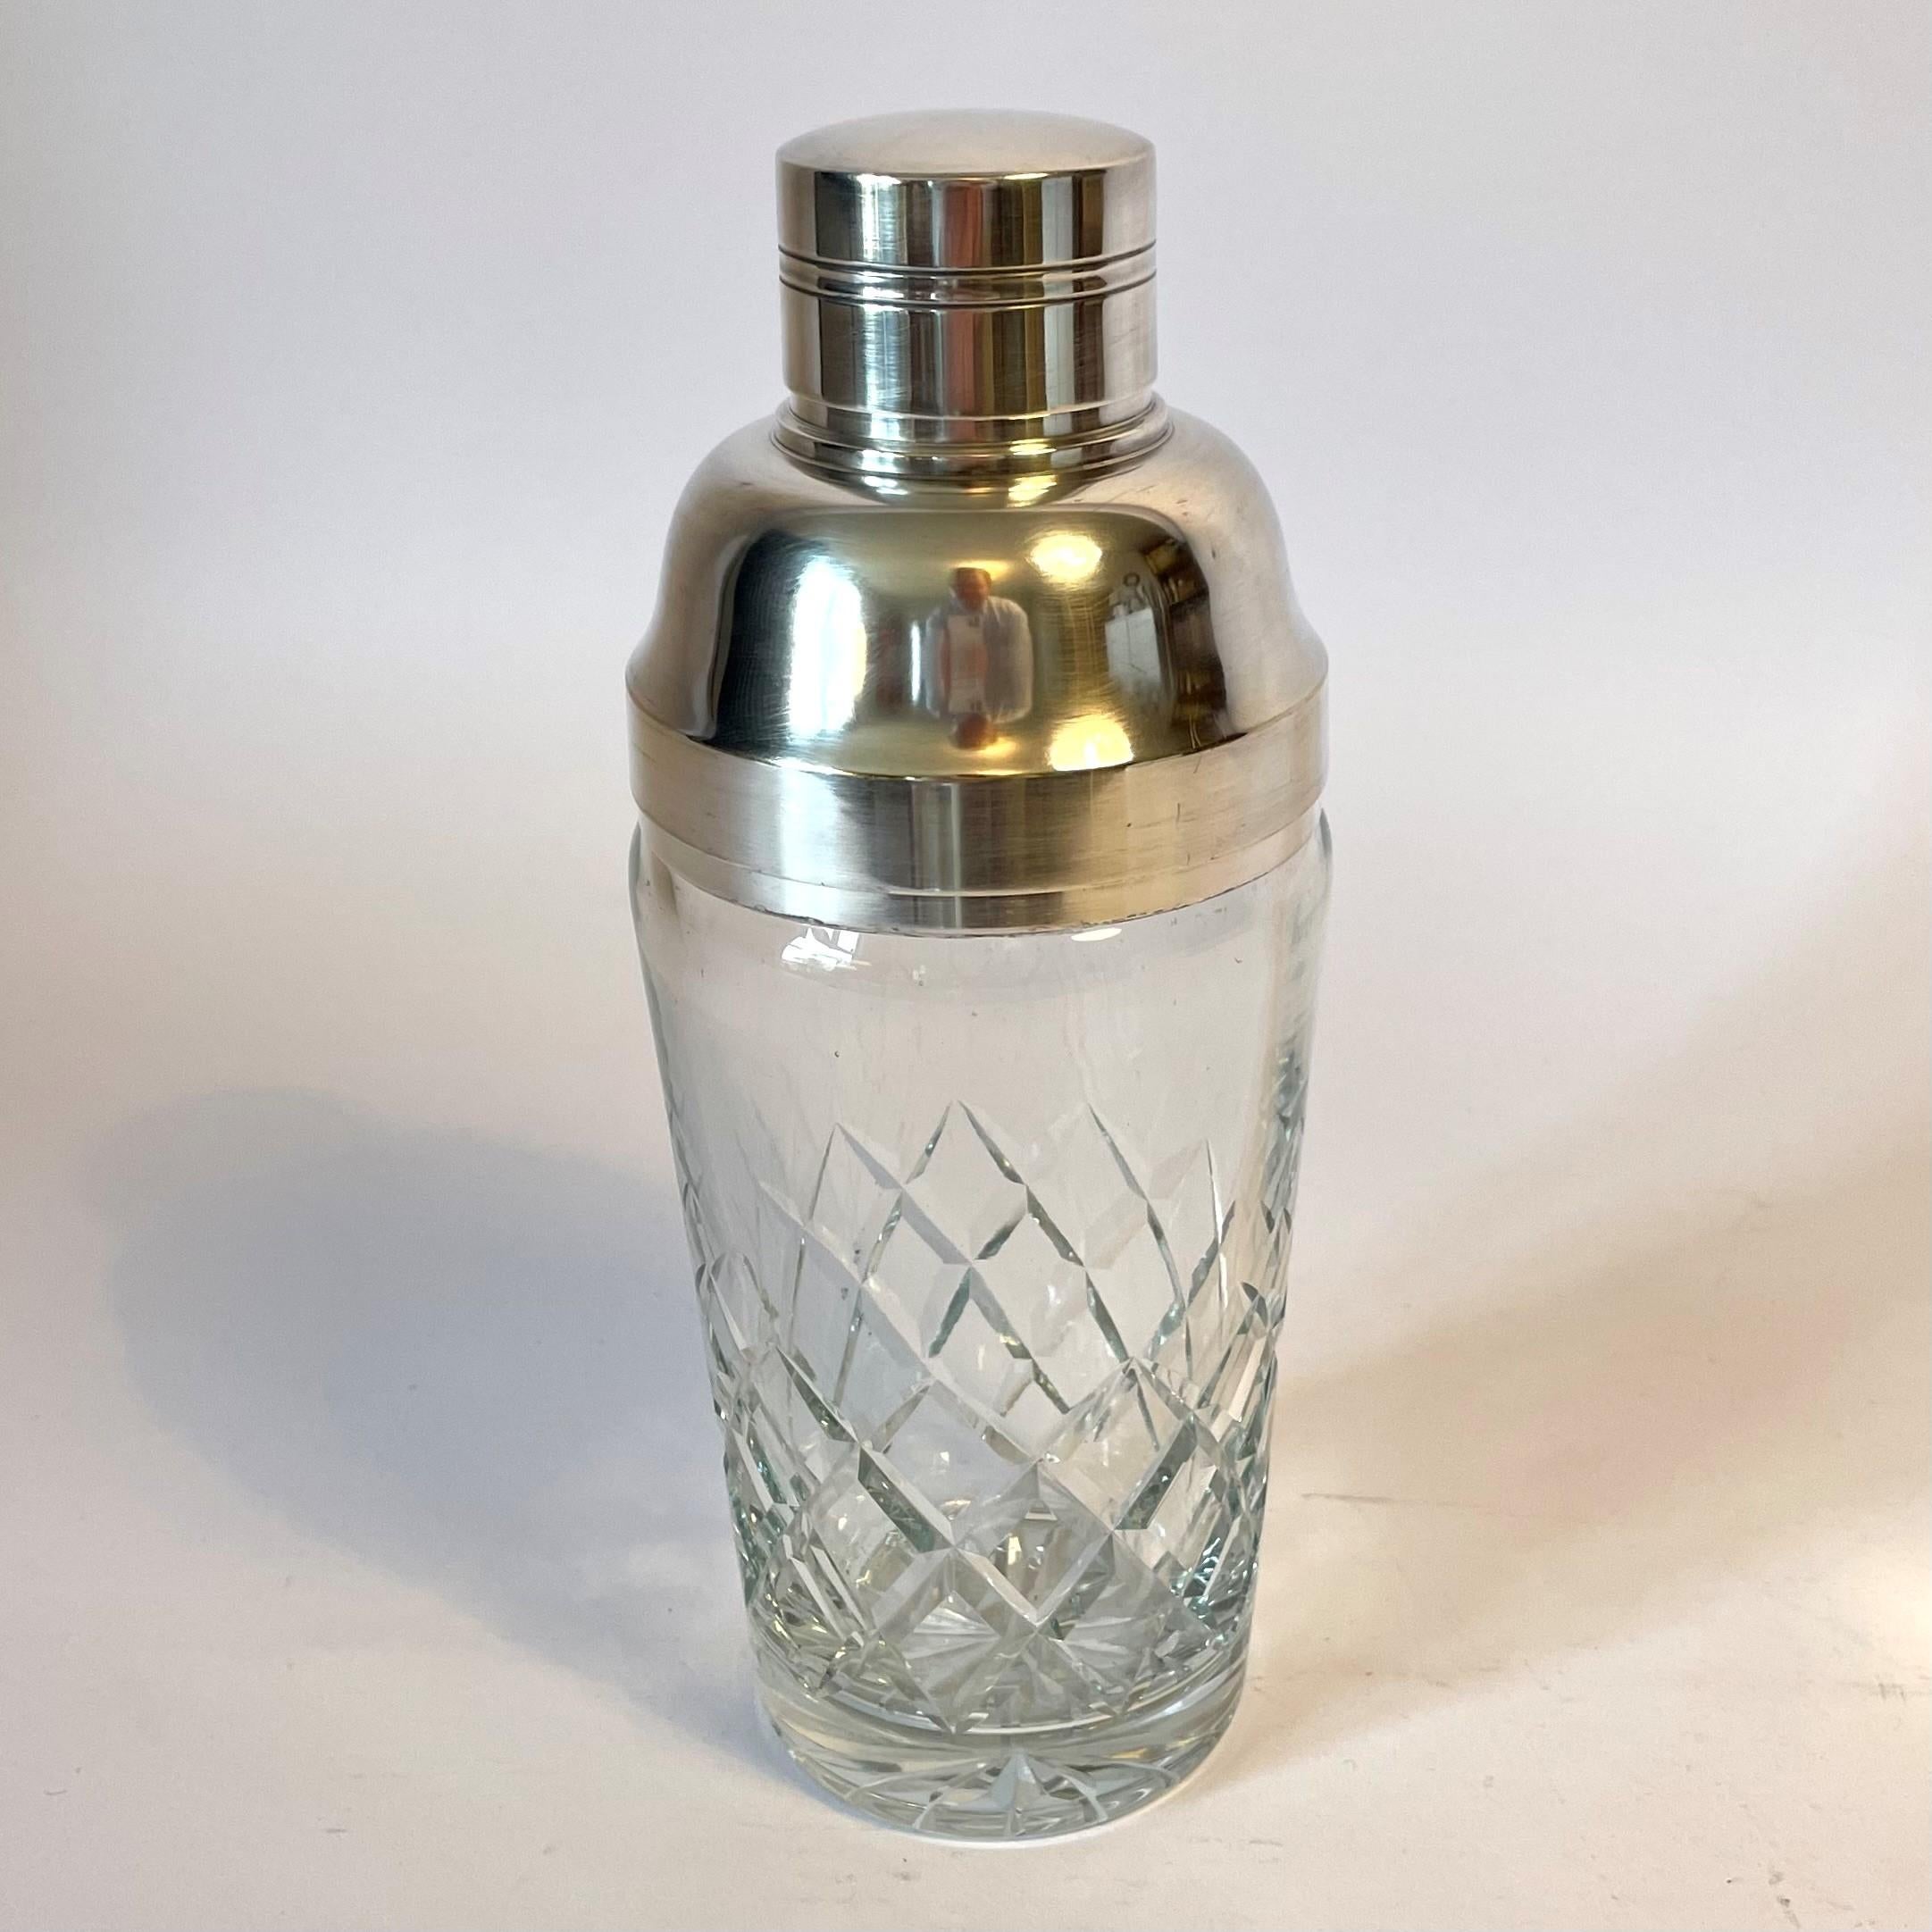 Large cocktail shaker in Chrystal with silver plated top. Elegant in its design and is of high quality. Probably manufactured in the 1940s -1950s.

Wear consistent with age and use.